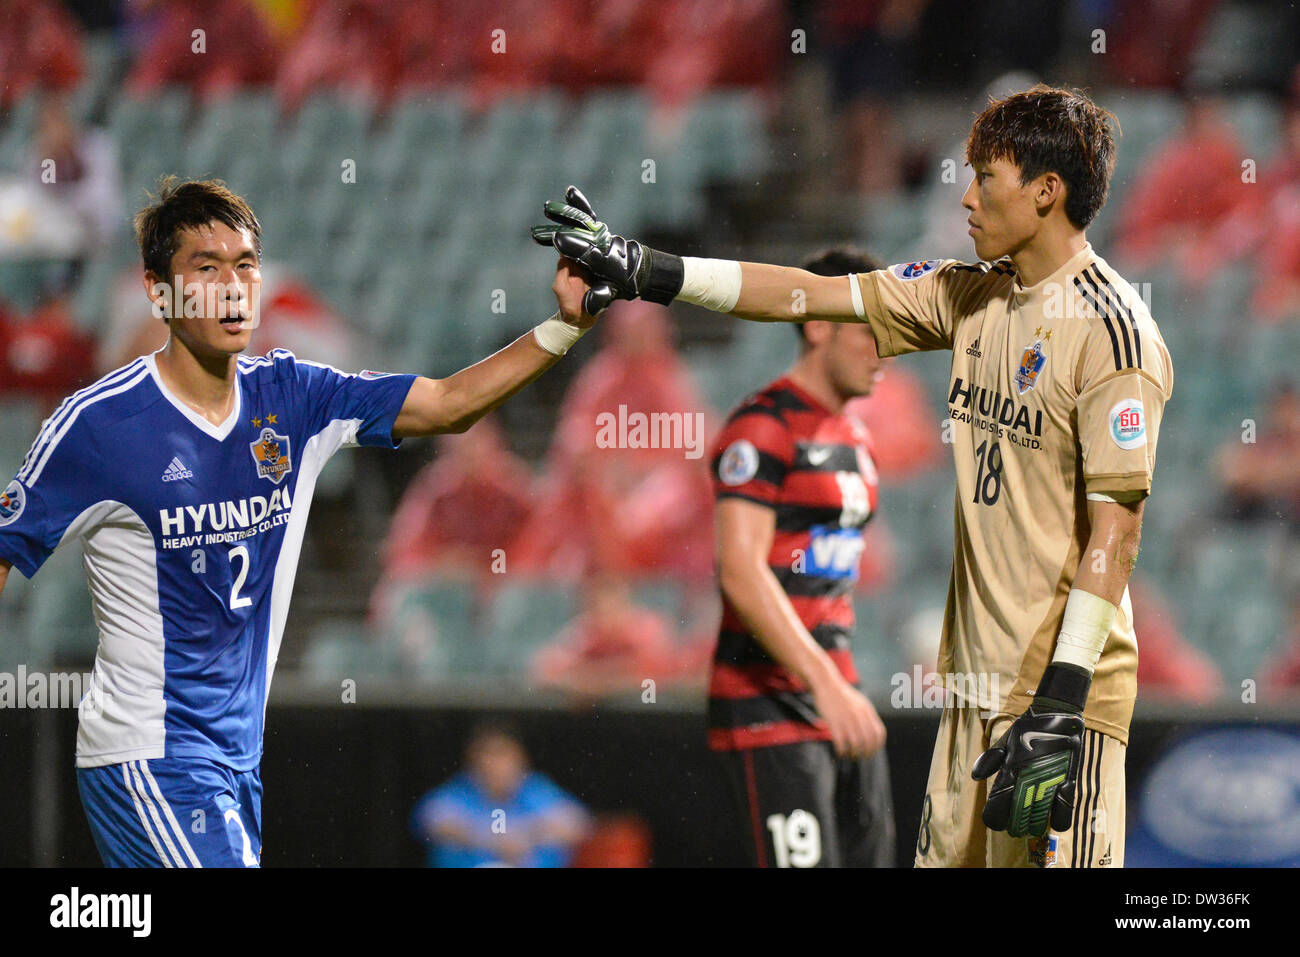 Sydney, Australia. 26th Feb, 2014. Ulsan defender Lee Yong and goalkeeper Kim Sung Gyu in action during the AFC Champions League game between Western Sydney Wanderers FC and Ulsan Hyundai FC of Korea from the Pirtek Stadium, Parramatta. Ulsan won 3-1. Credit:  Action Plus Sports/Alamy Live News Stock Photo